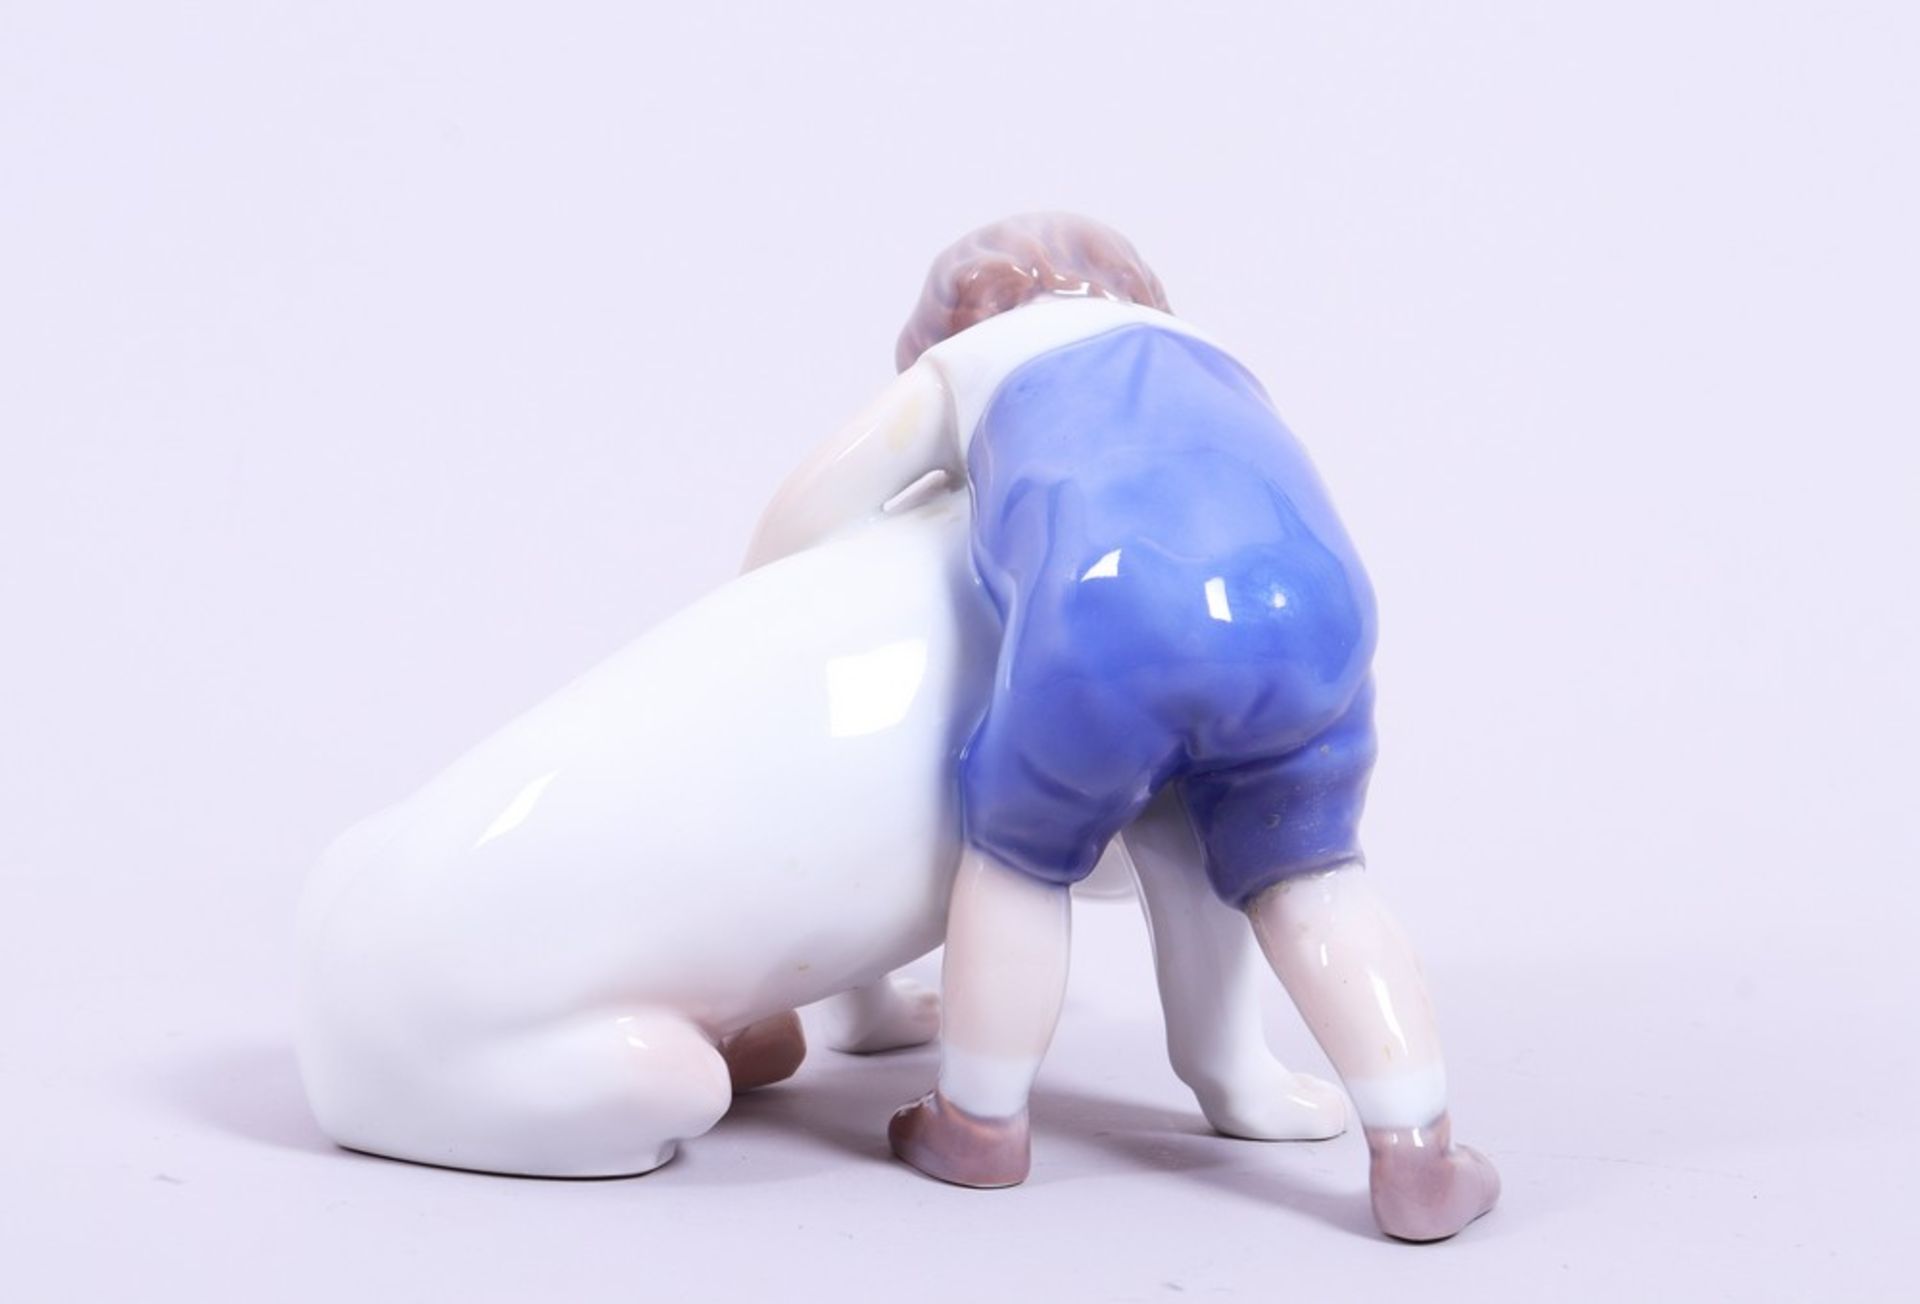 Boy with a bulldog, "Best Friends", design by Michaela Ahlmann for Bing & Grondahl, manufactured 19 - Image 4 of 5